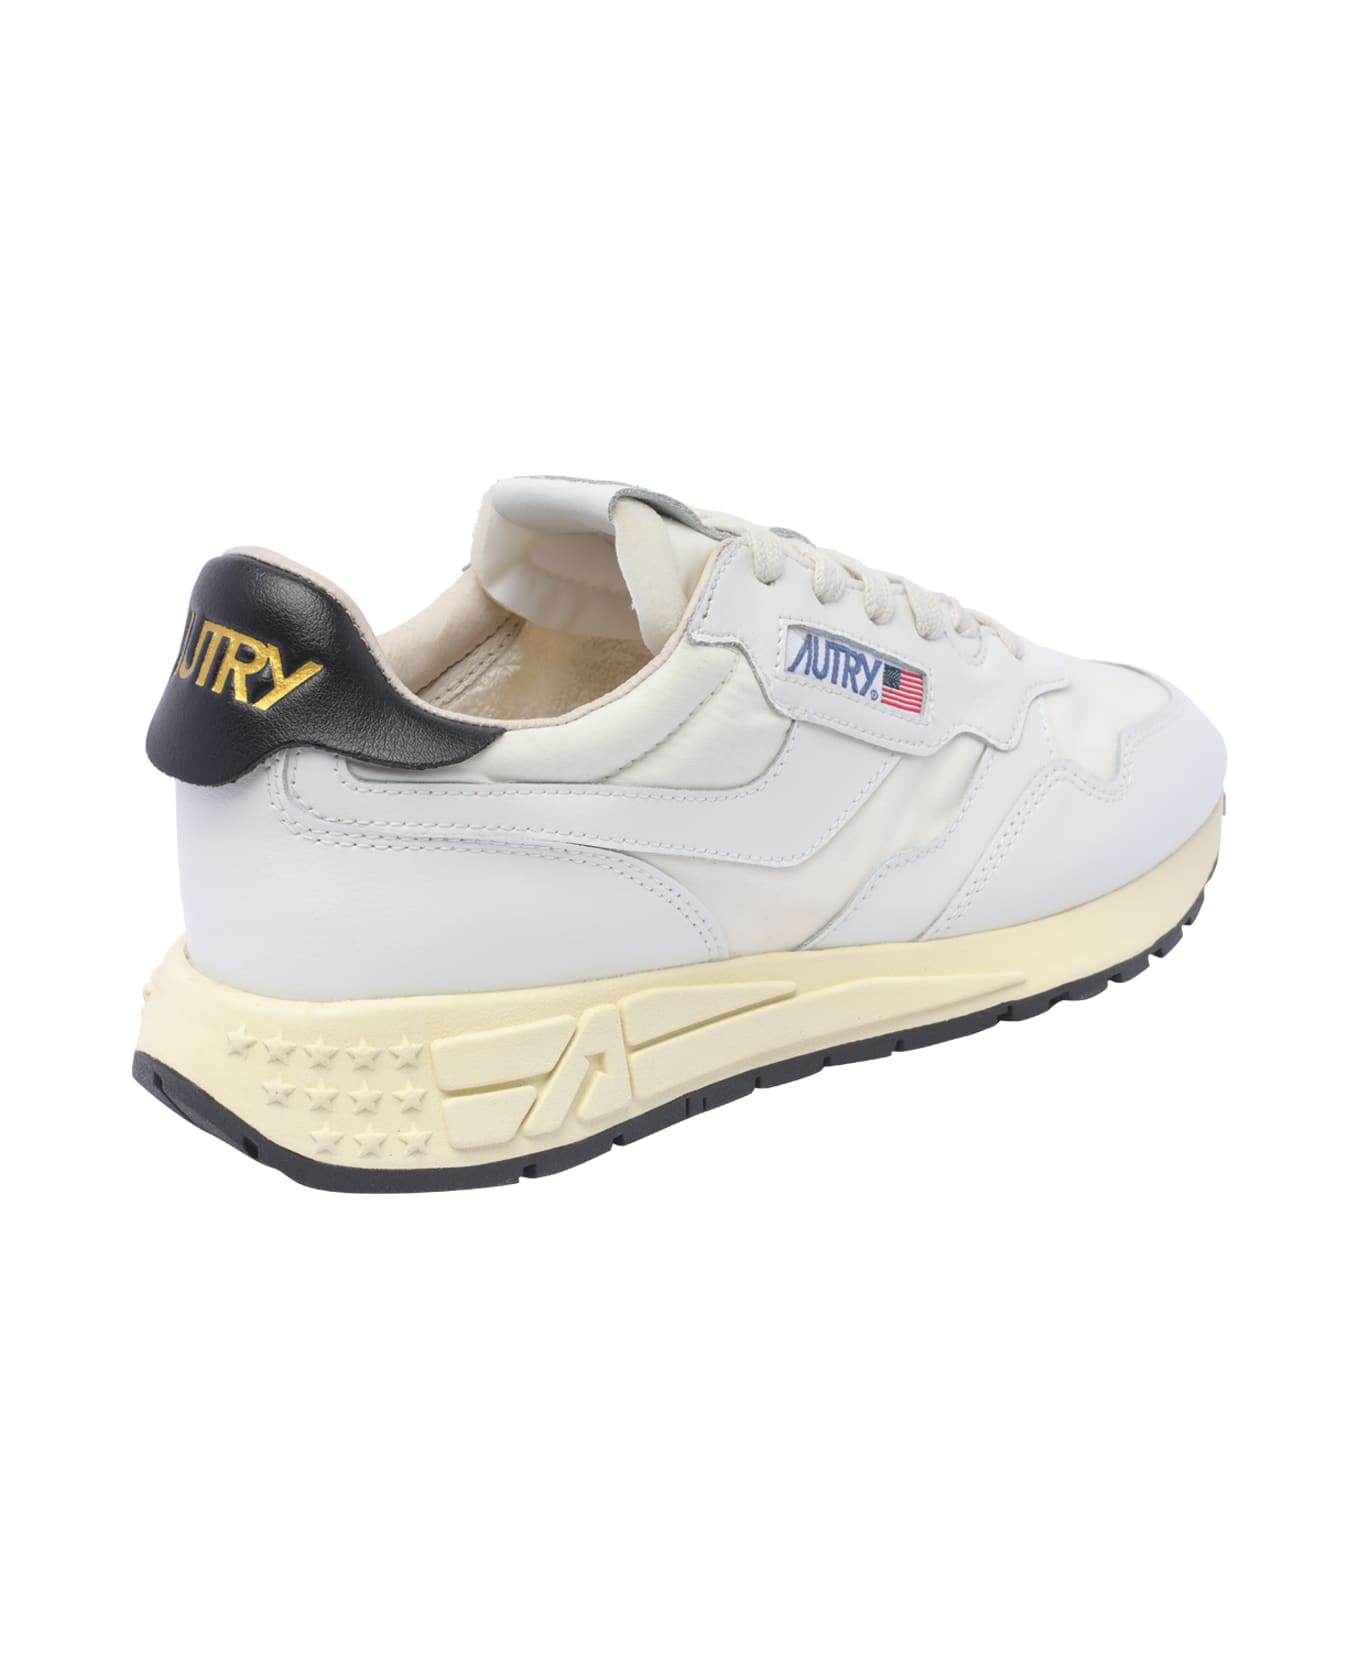 Autry Reelwind Sneakers - White/white スニーカー